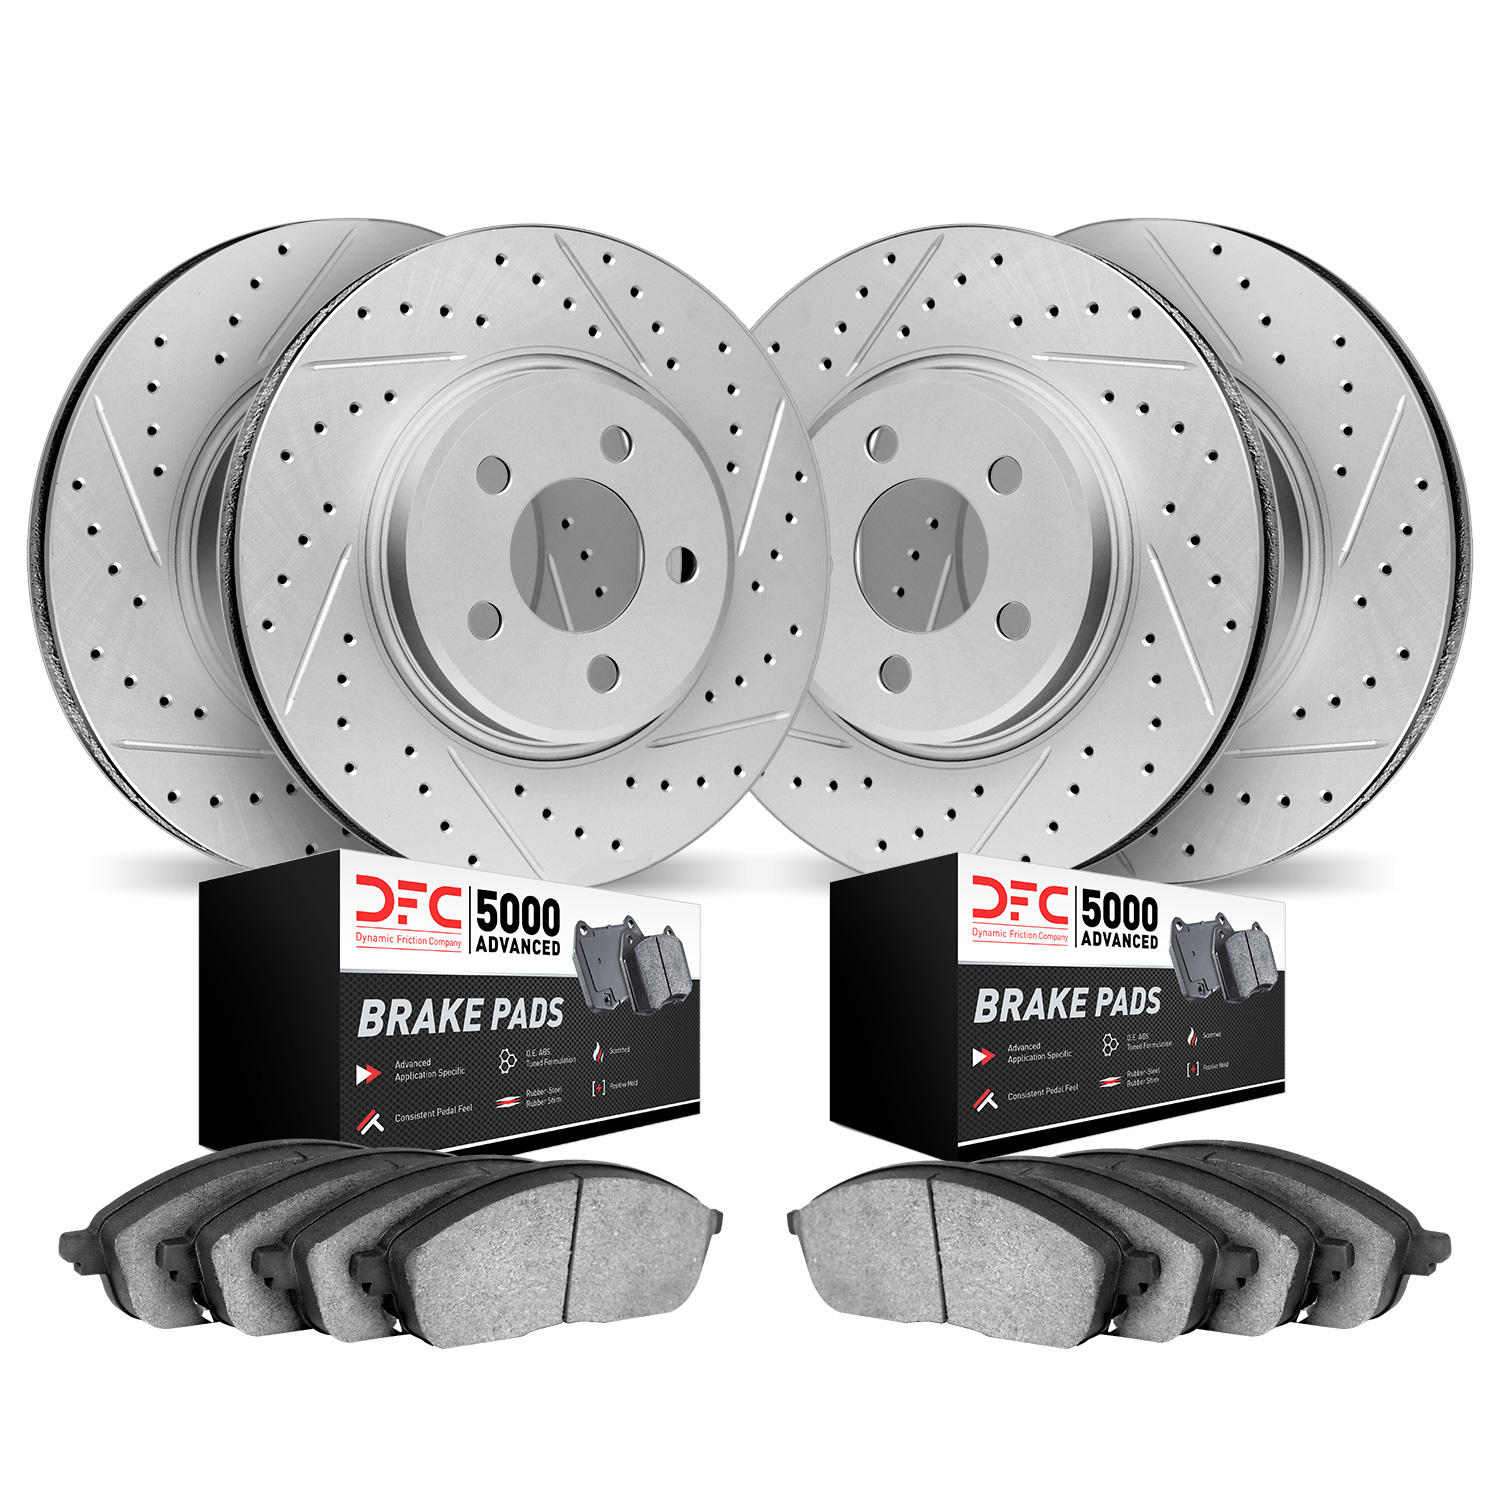 2504-54194 Geoperformance Drilled/Slotted Rotors w/5000 Advanced Brake Pads Kit, 1994-2004 Ford/Lincoln/Mercury/Mazda, Position: